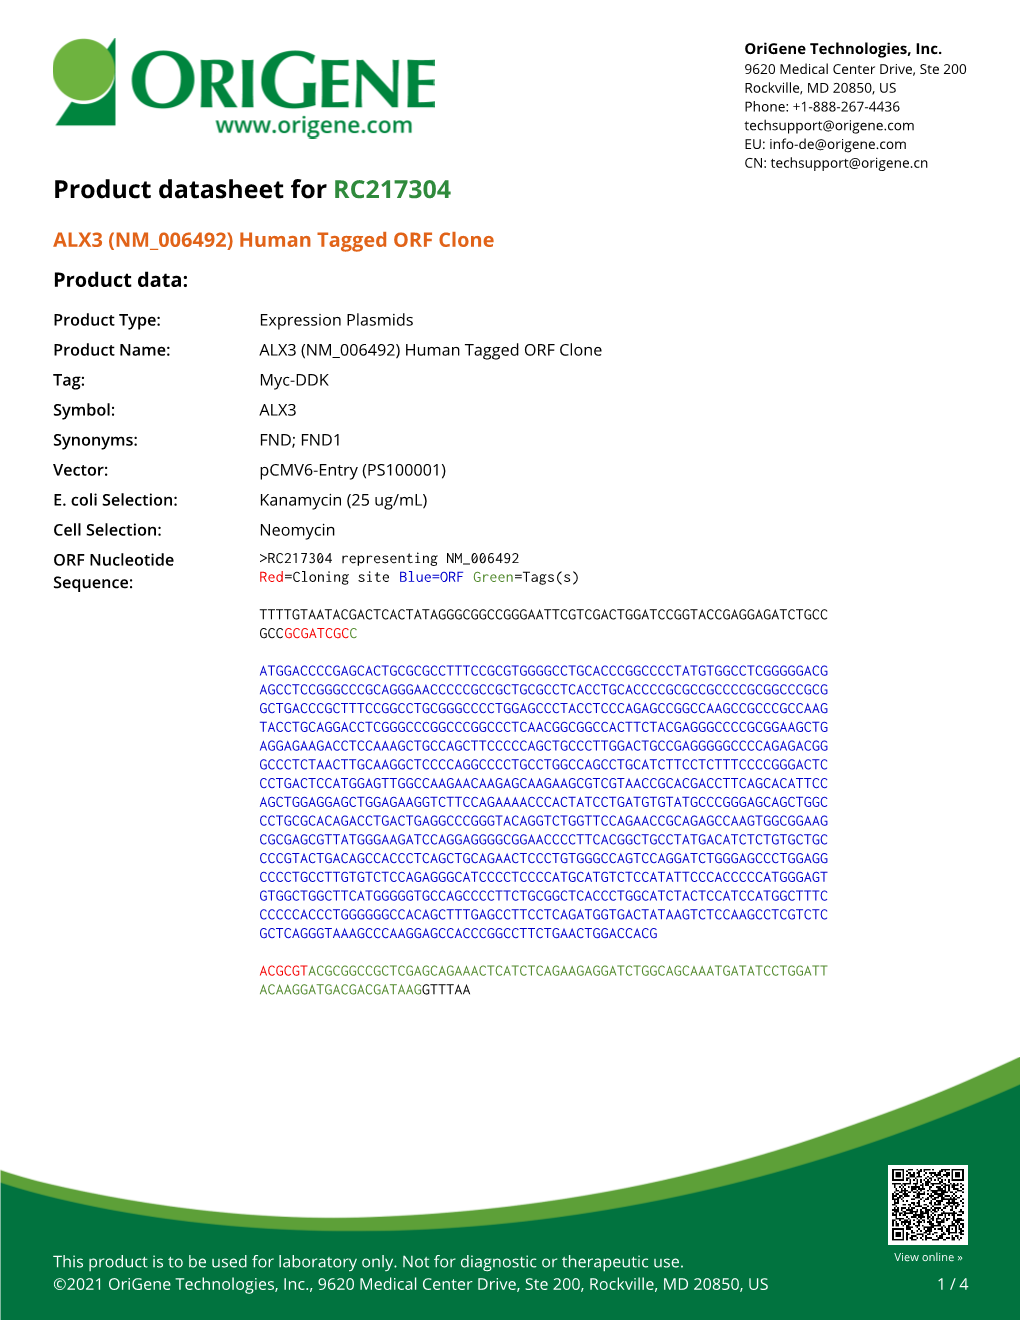 ALX3 (NM 006492) Human Tagged ORF Clone Product Data